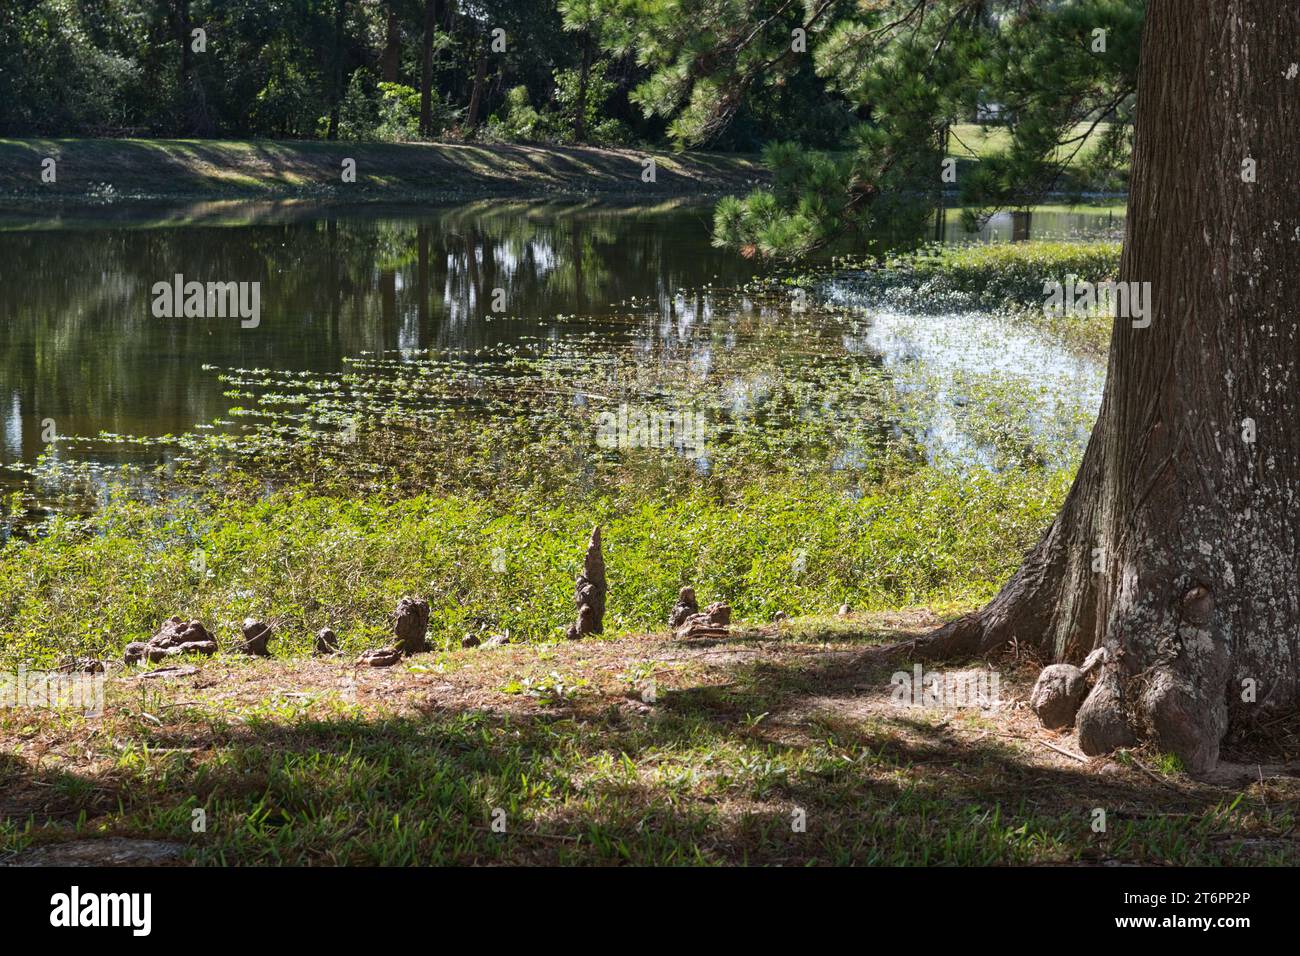 Bald Cypress tree and knee structures protruding from the edge of a freshwater lake in Houston, TX. Stock Photo